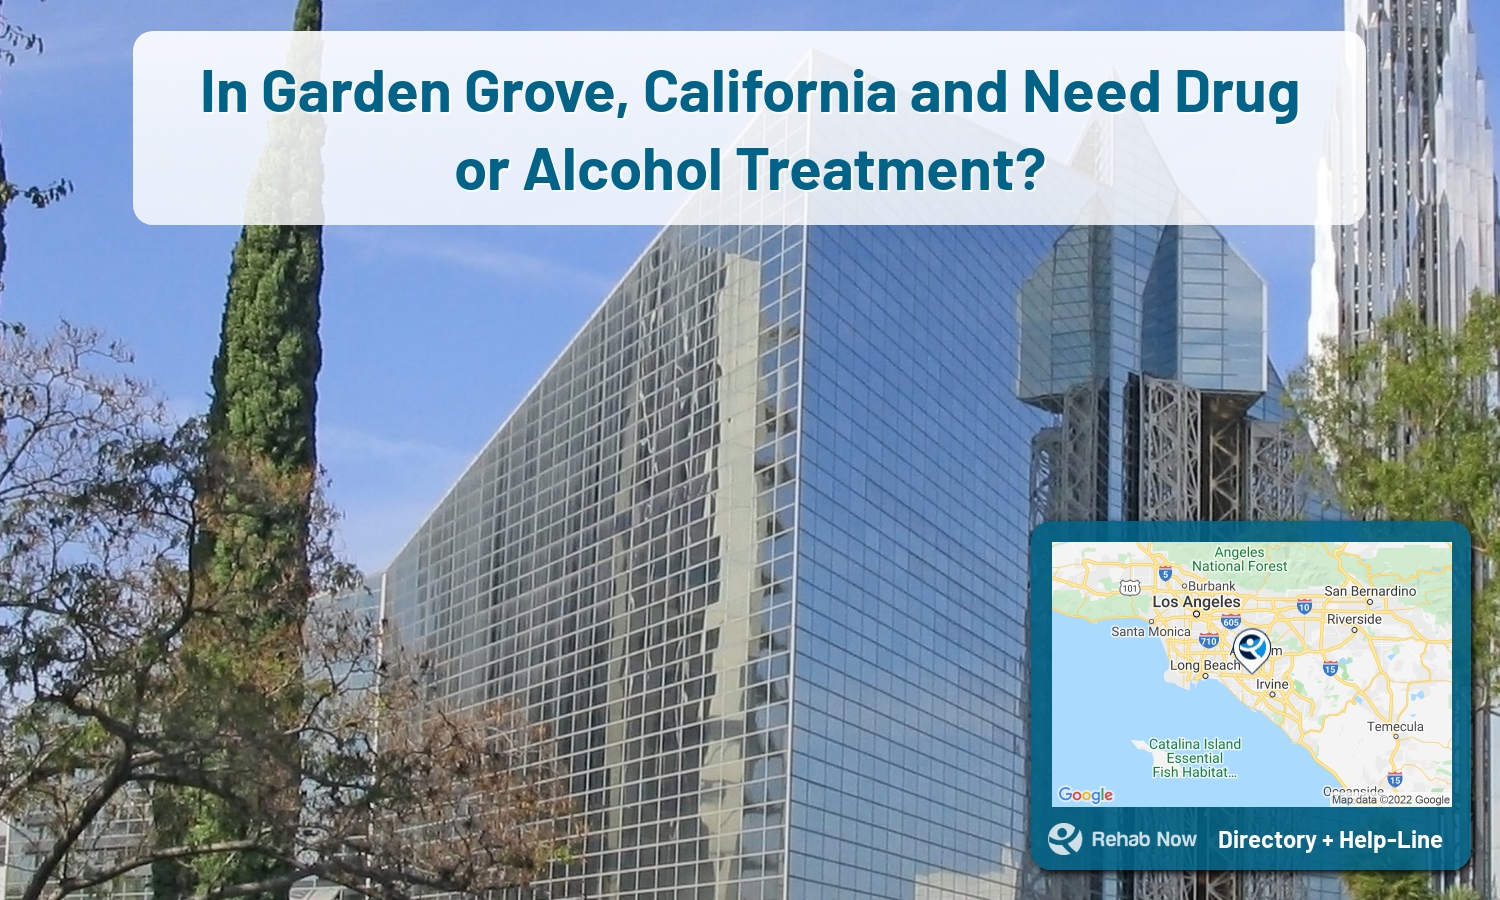 Garden Grove, CA Treatment Centers. Find drug rehab in Garden Grove, California, or detox and treatment programs. Get the right help now!